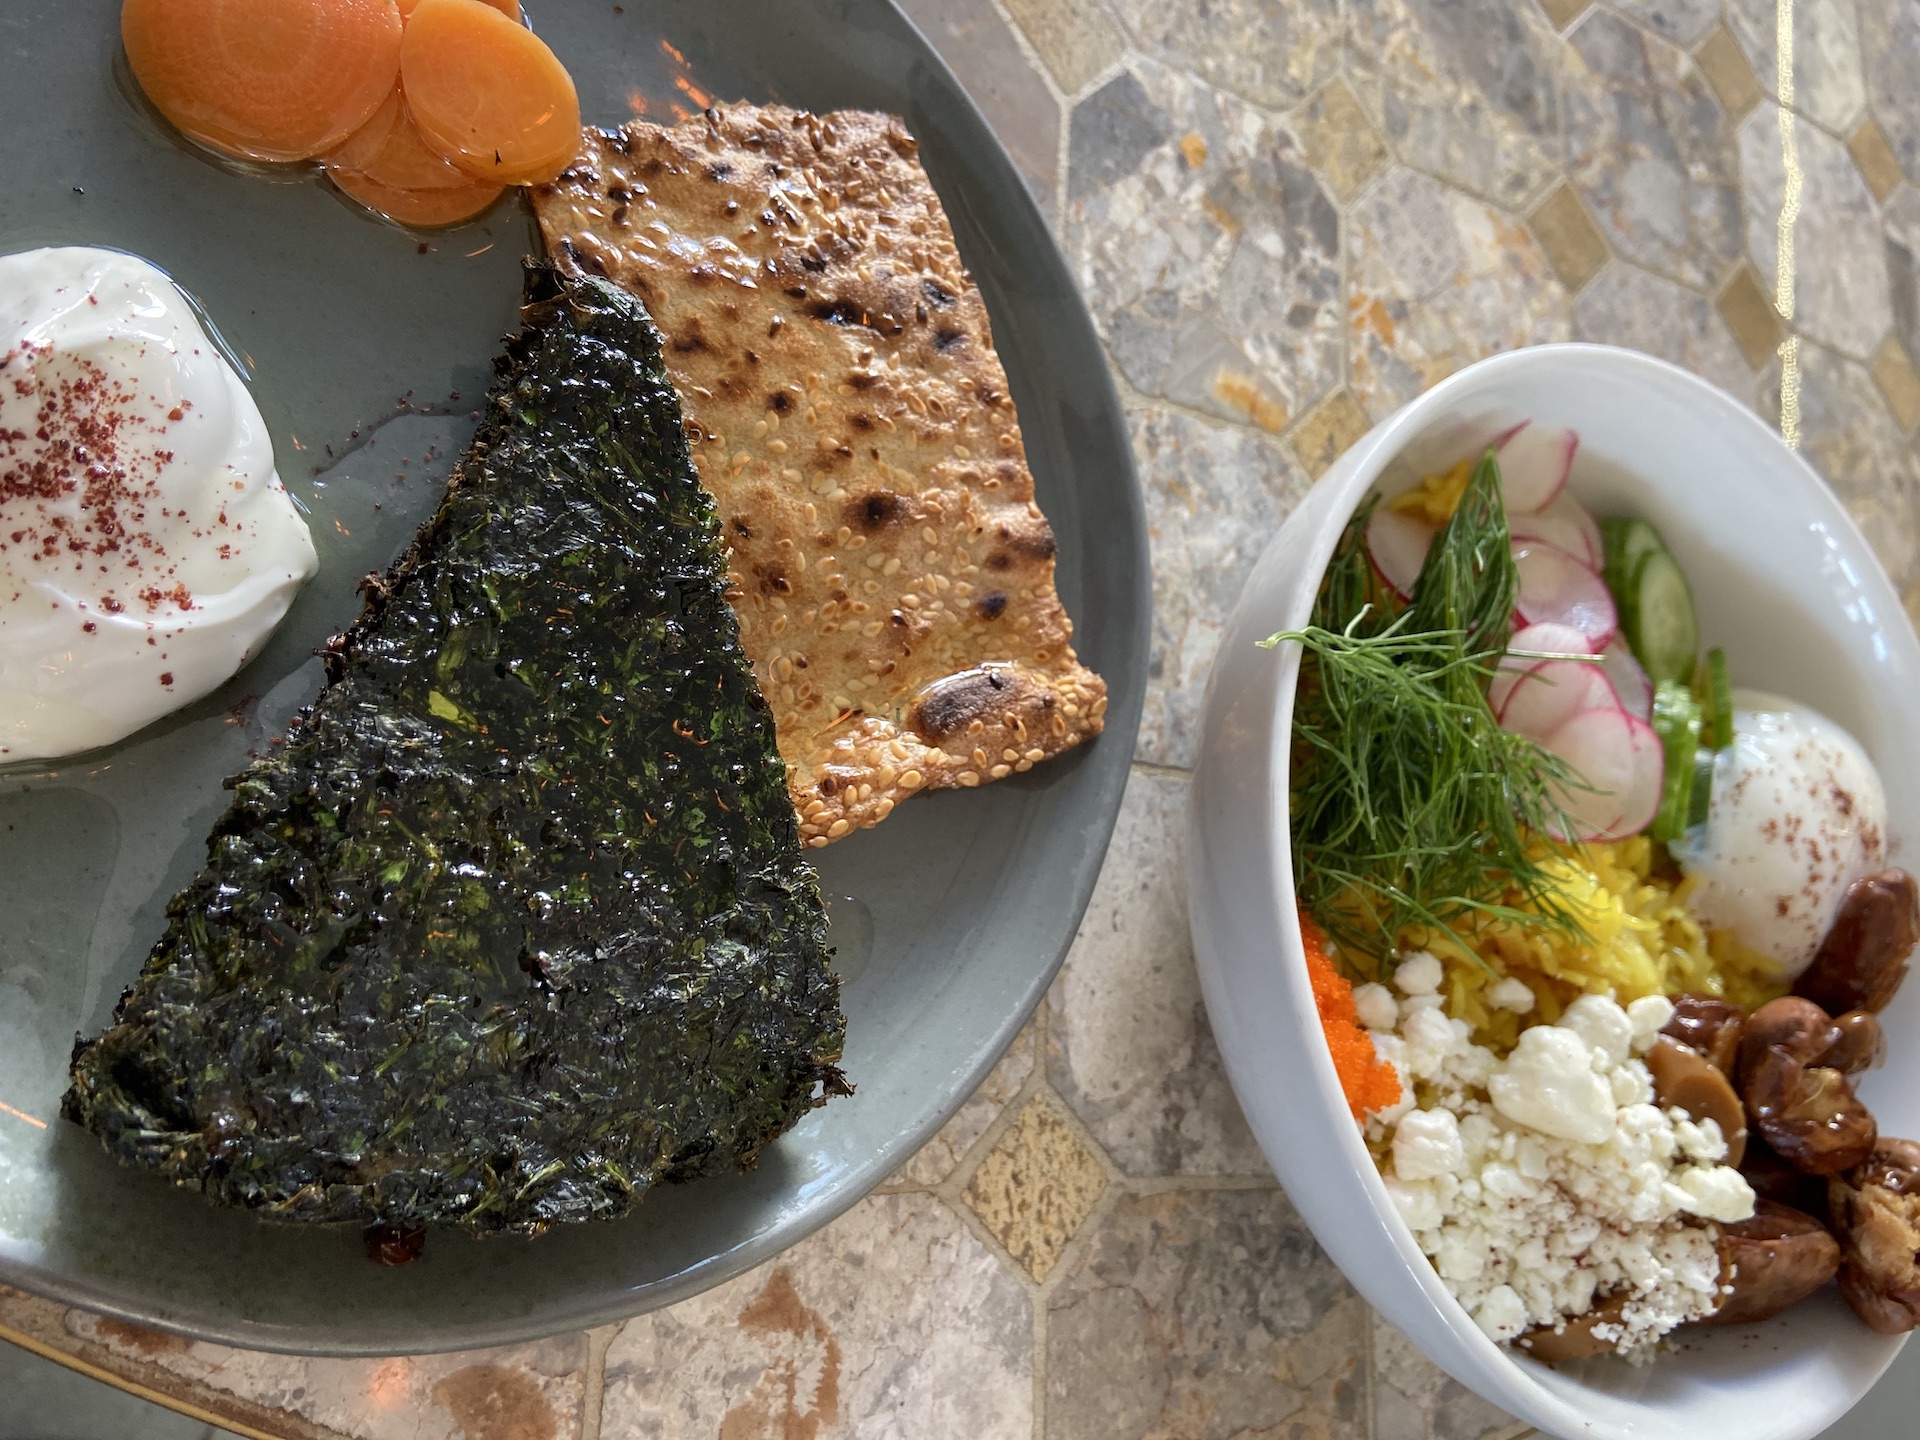 Kuku Sabzi, an herb frittata, served with sumac labneh, pickled carrots and toasted flatbread.